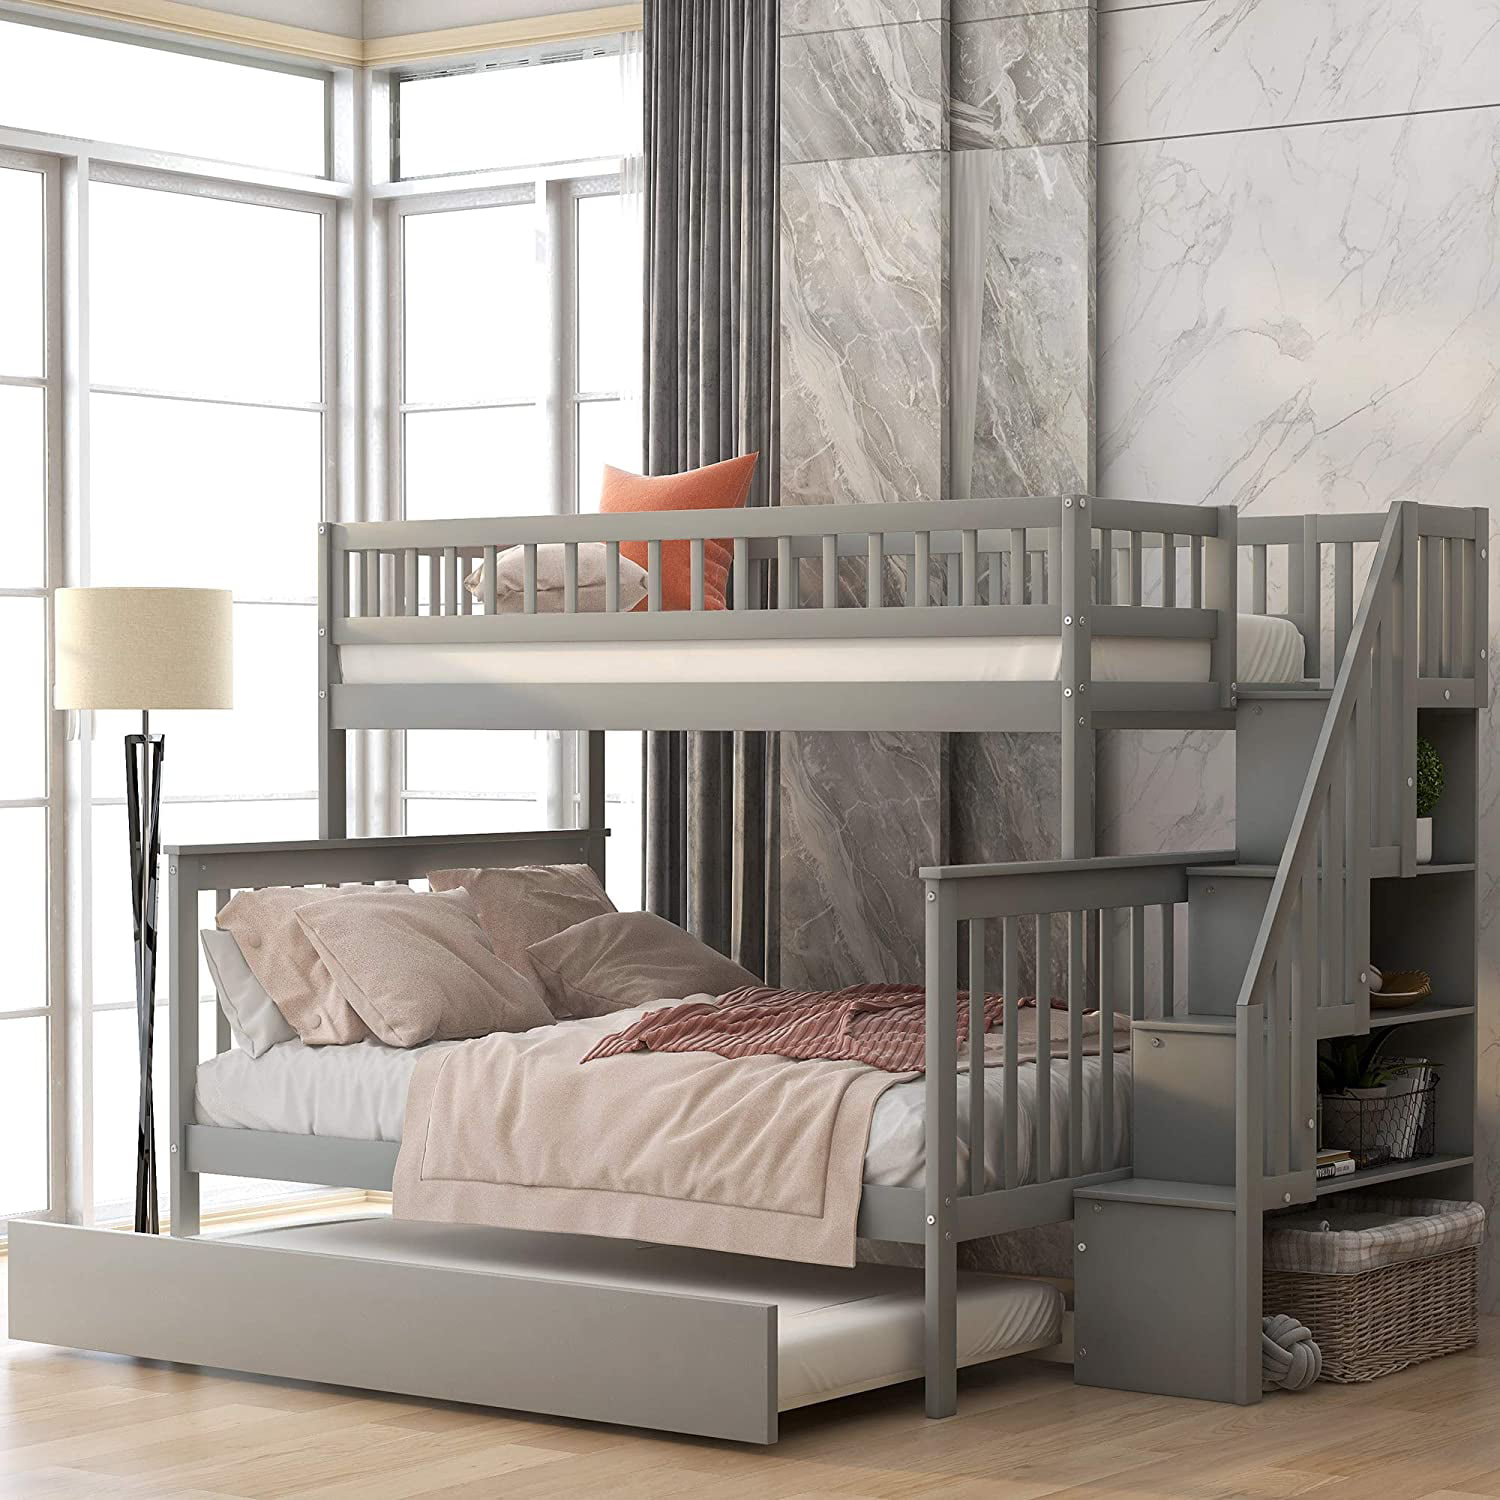 Piscis Bunk Bed Beds Twin Over, Solid Wood Bunk Beds Twin Over Full